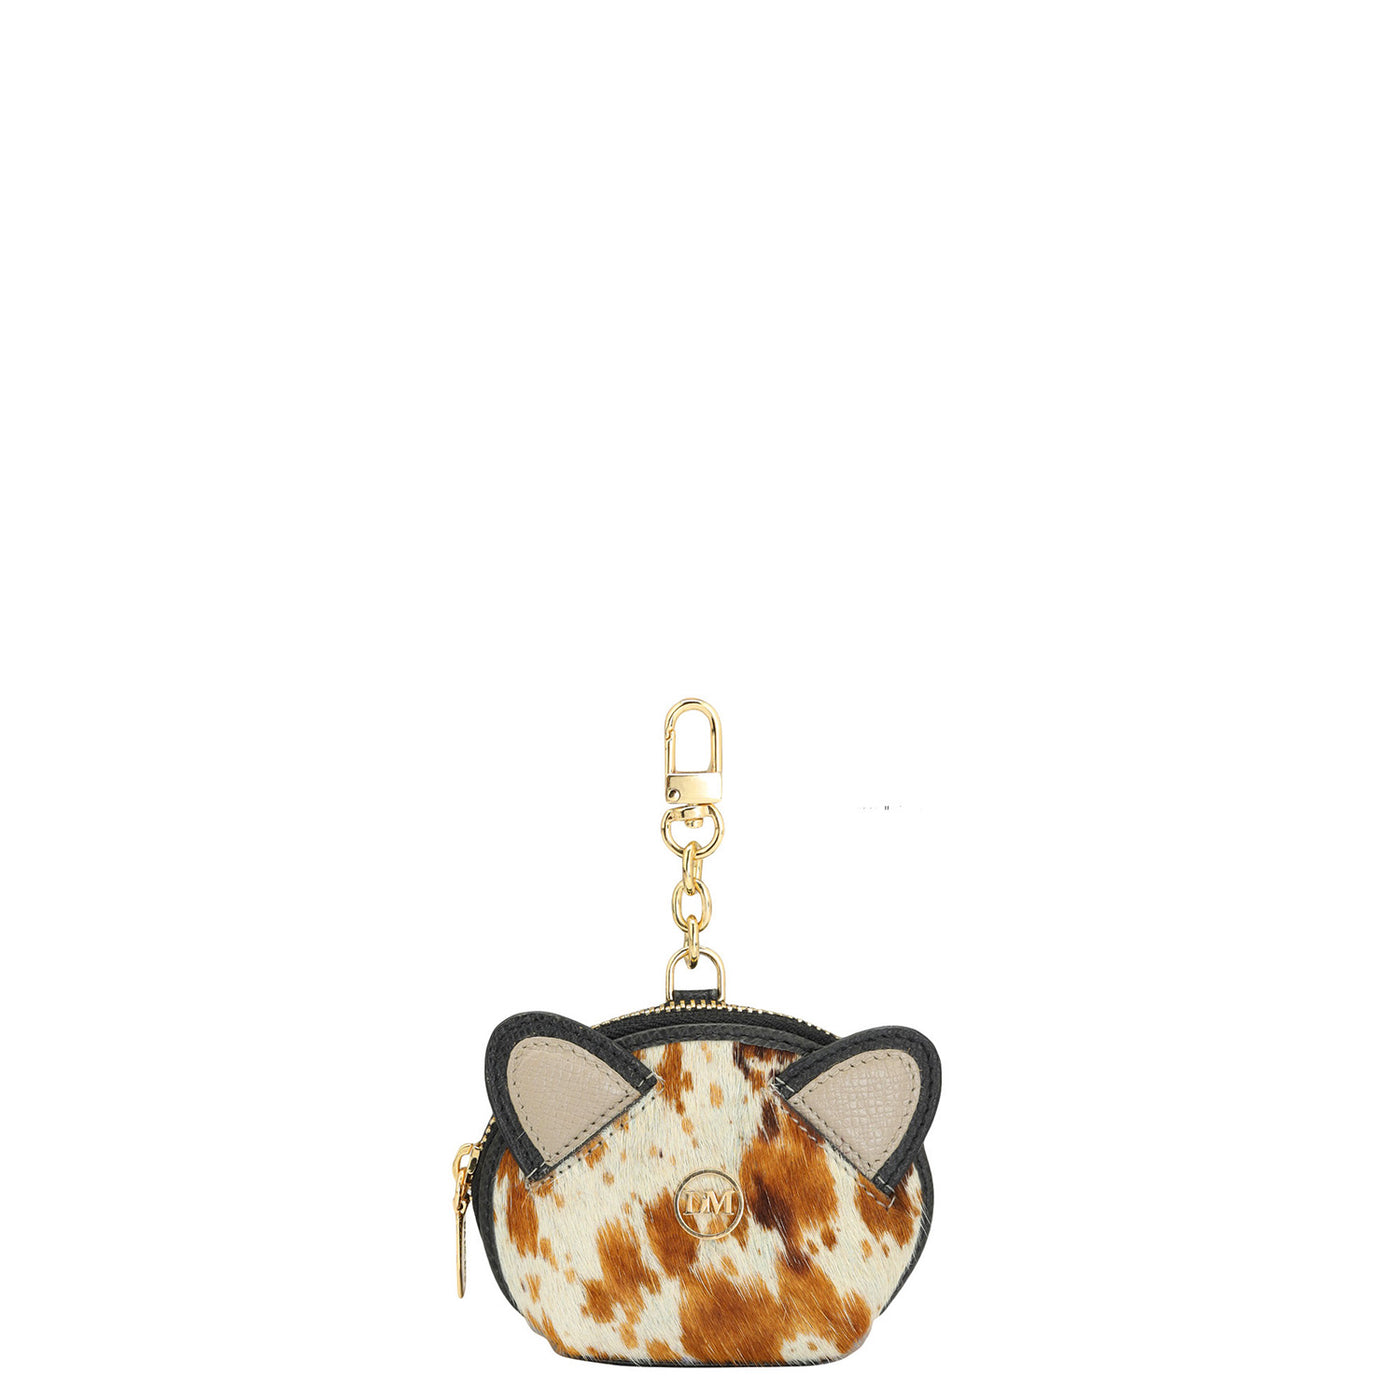 Fur Franzy Leather Bag Hanging - Off White & Cognac